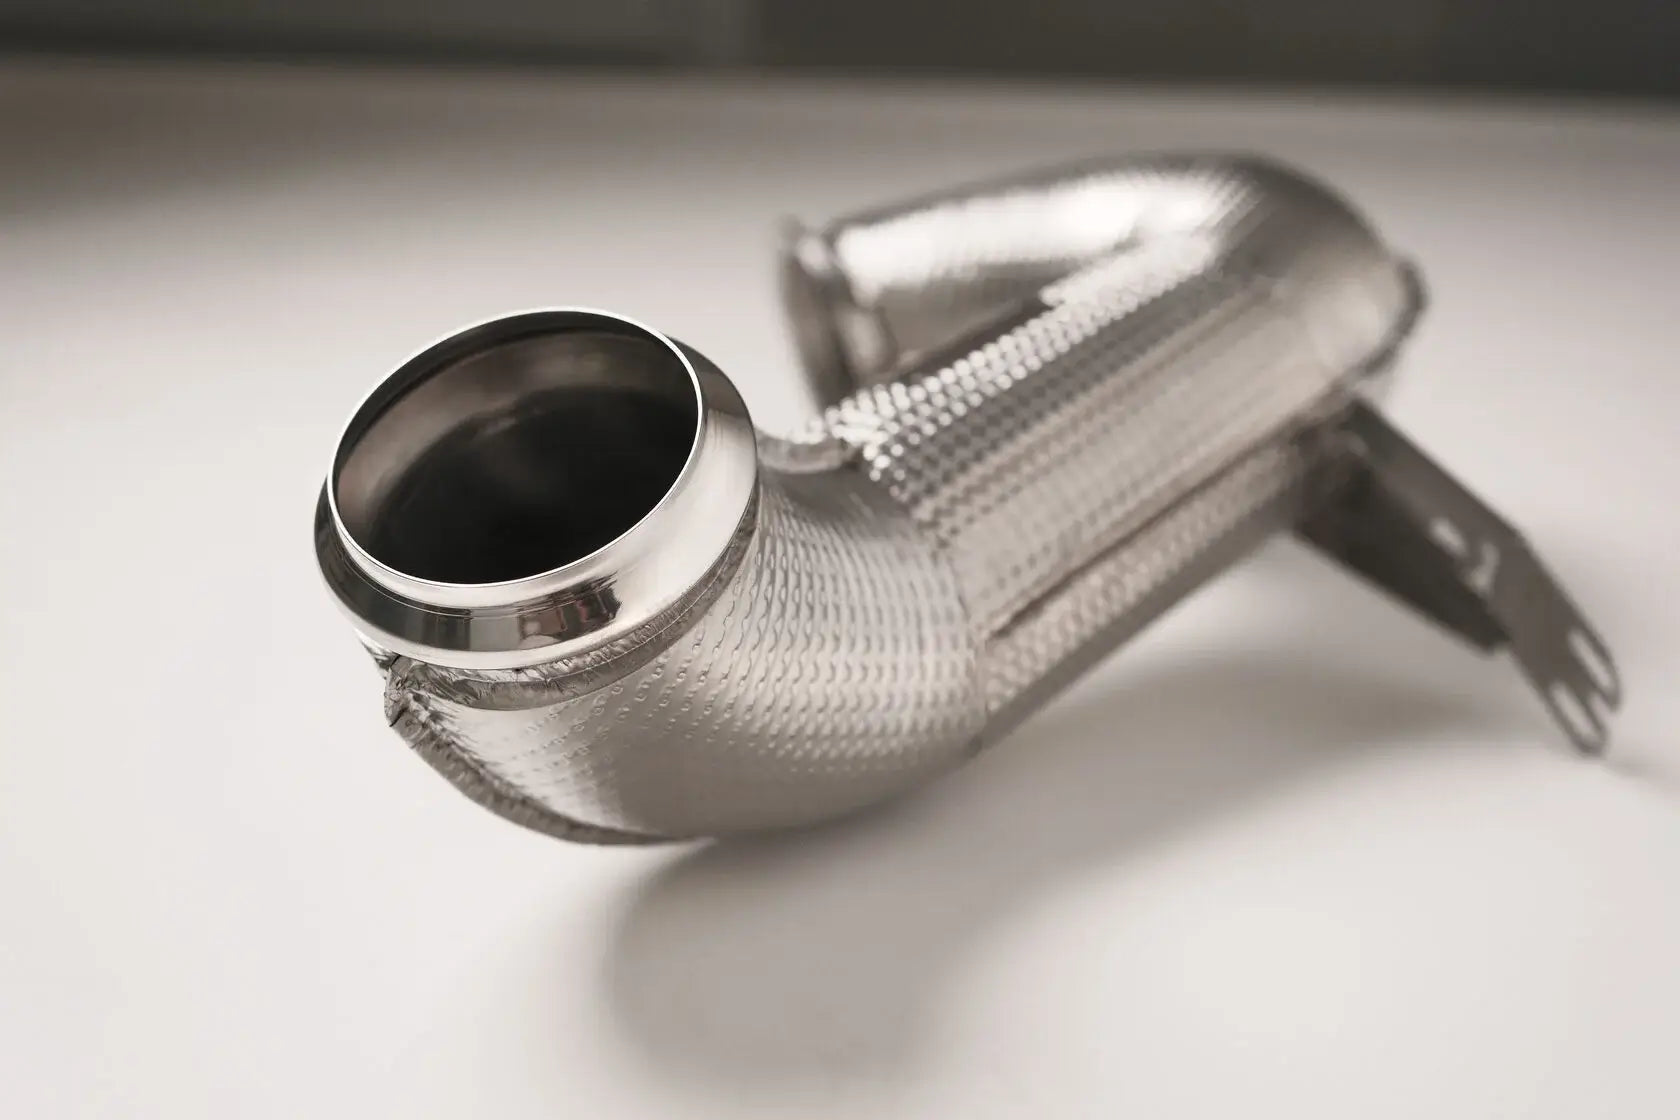 DEIKIN 10-MB.A45S.W177-DP Downpipe for Mercedes-AMG A45 S (W177) without HeatShield Photo-0 